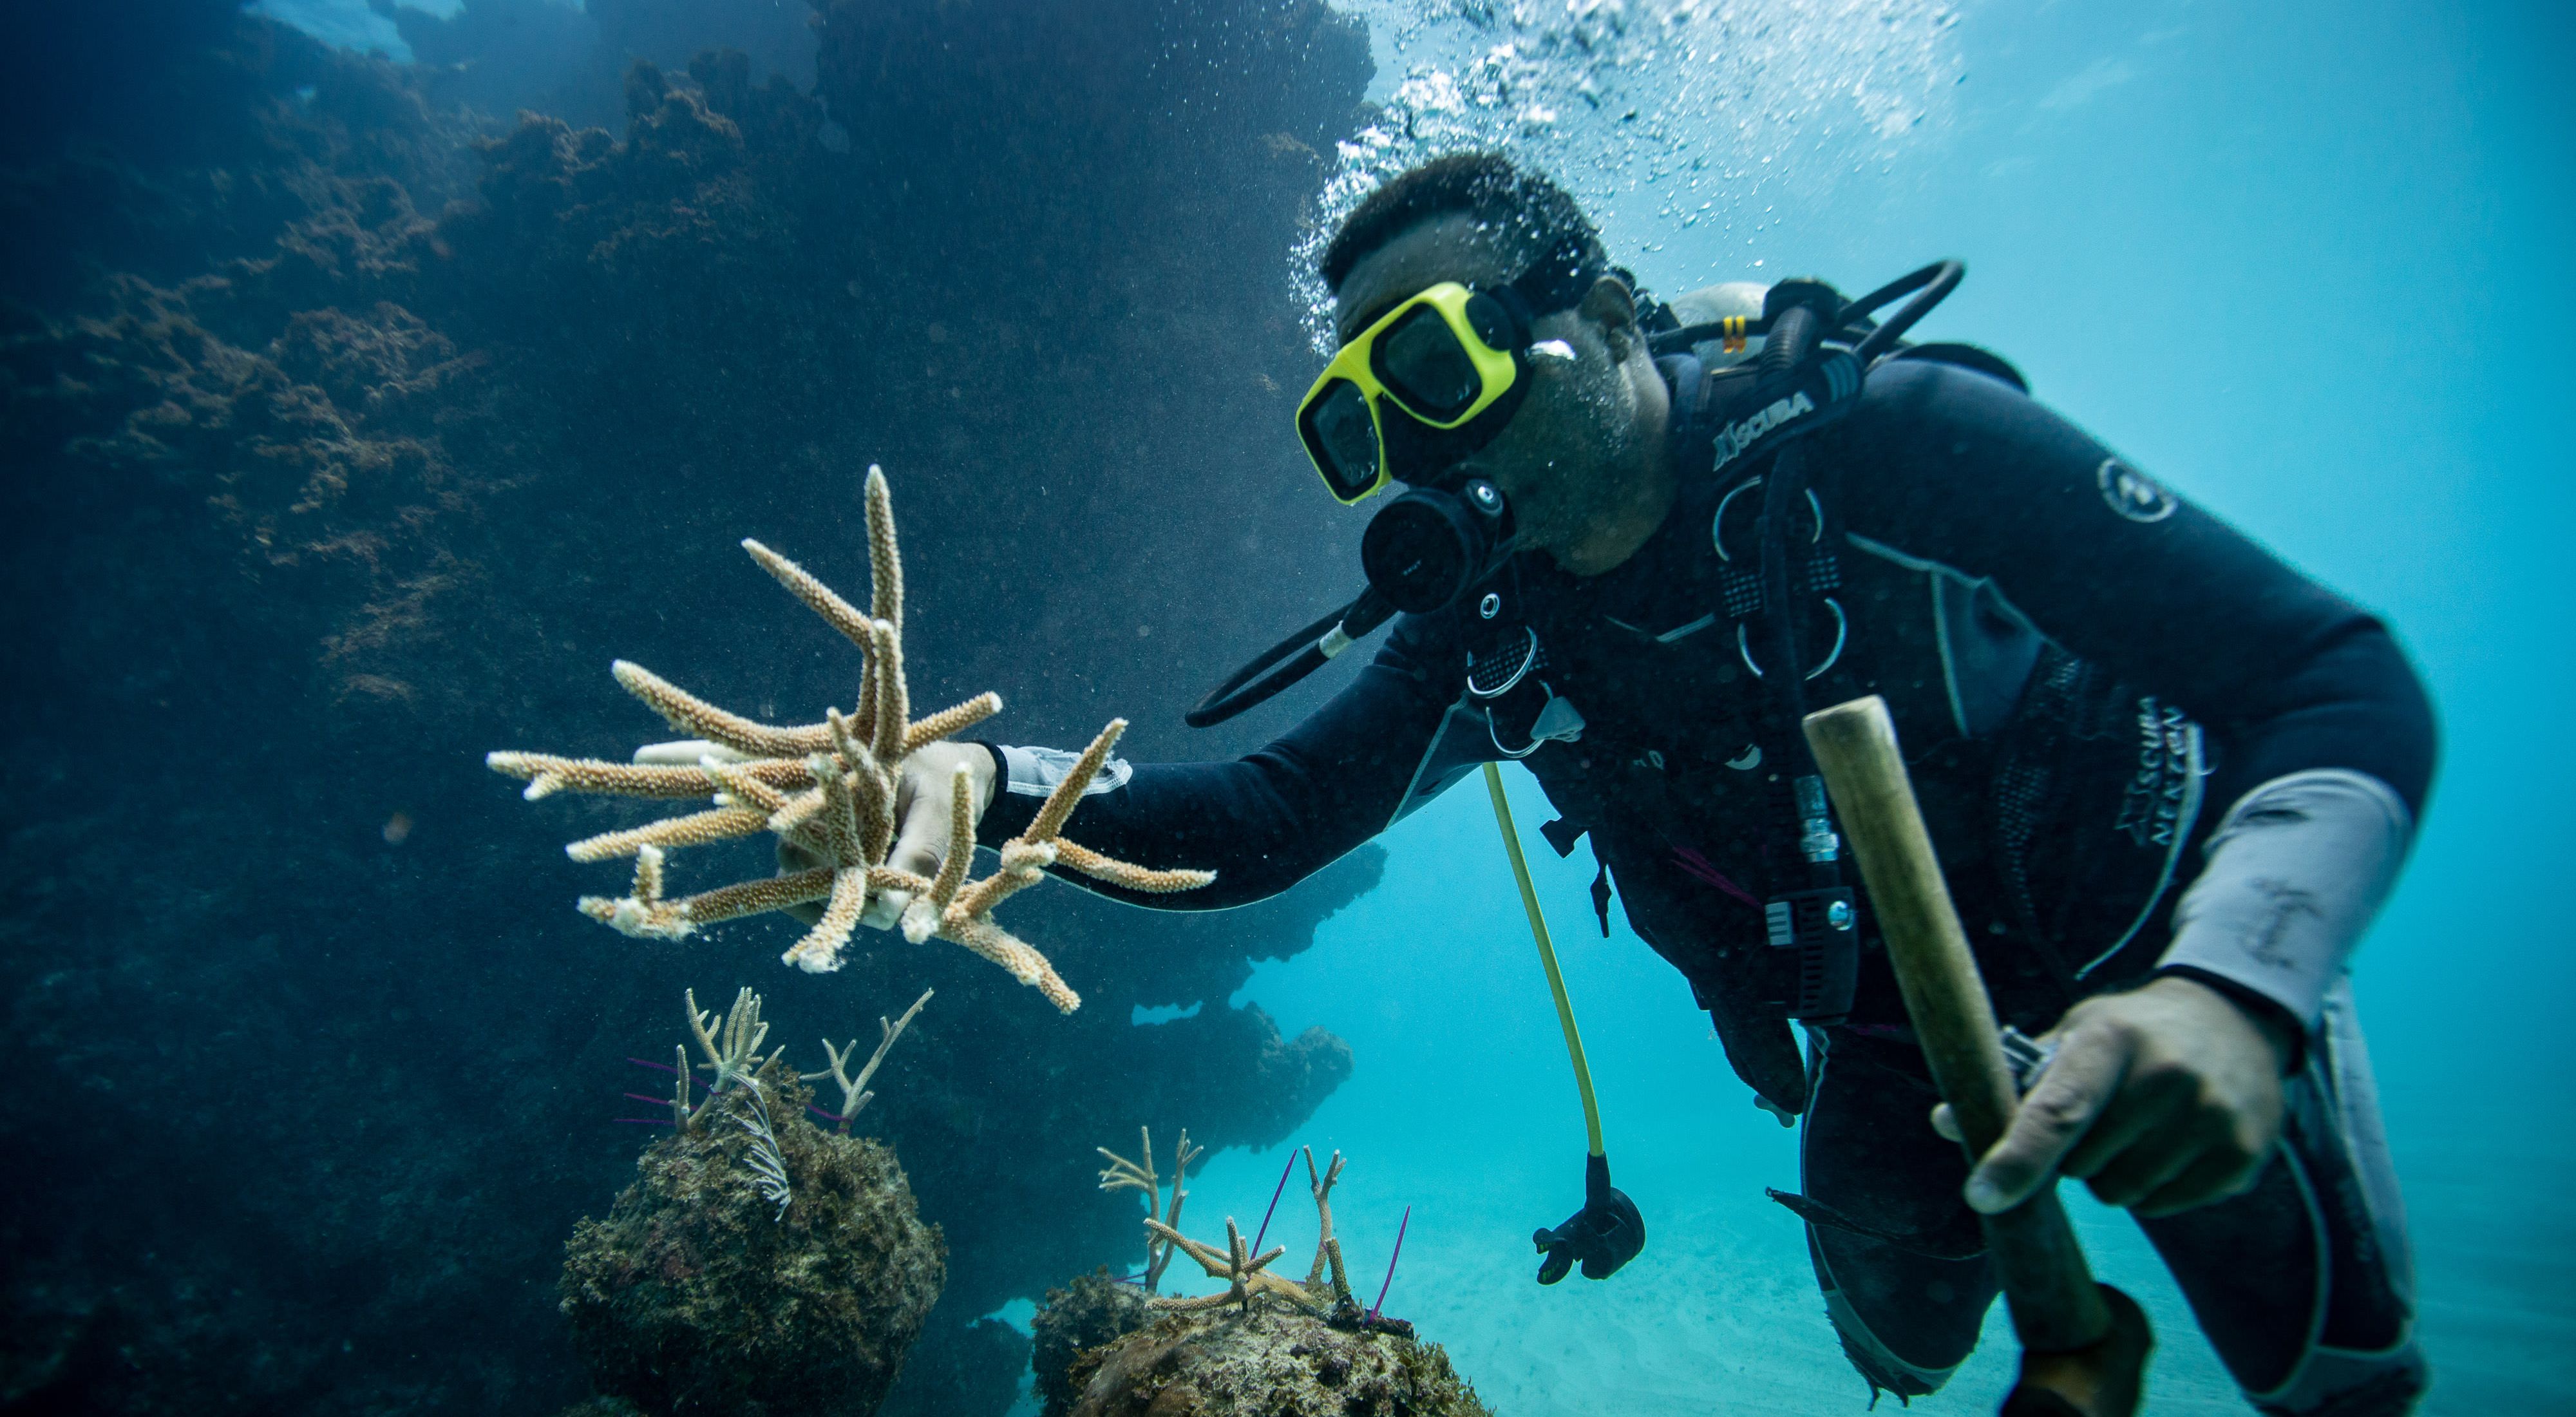 A diver repairs a coral reef in the Dominican Republic.